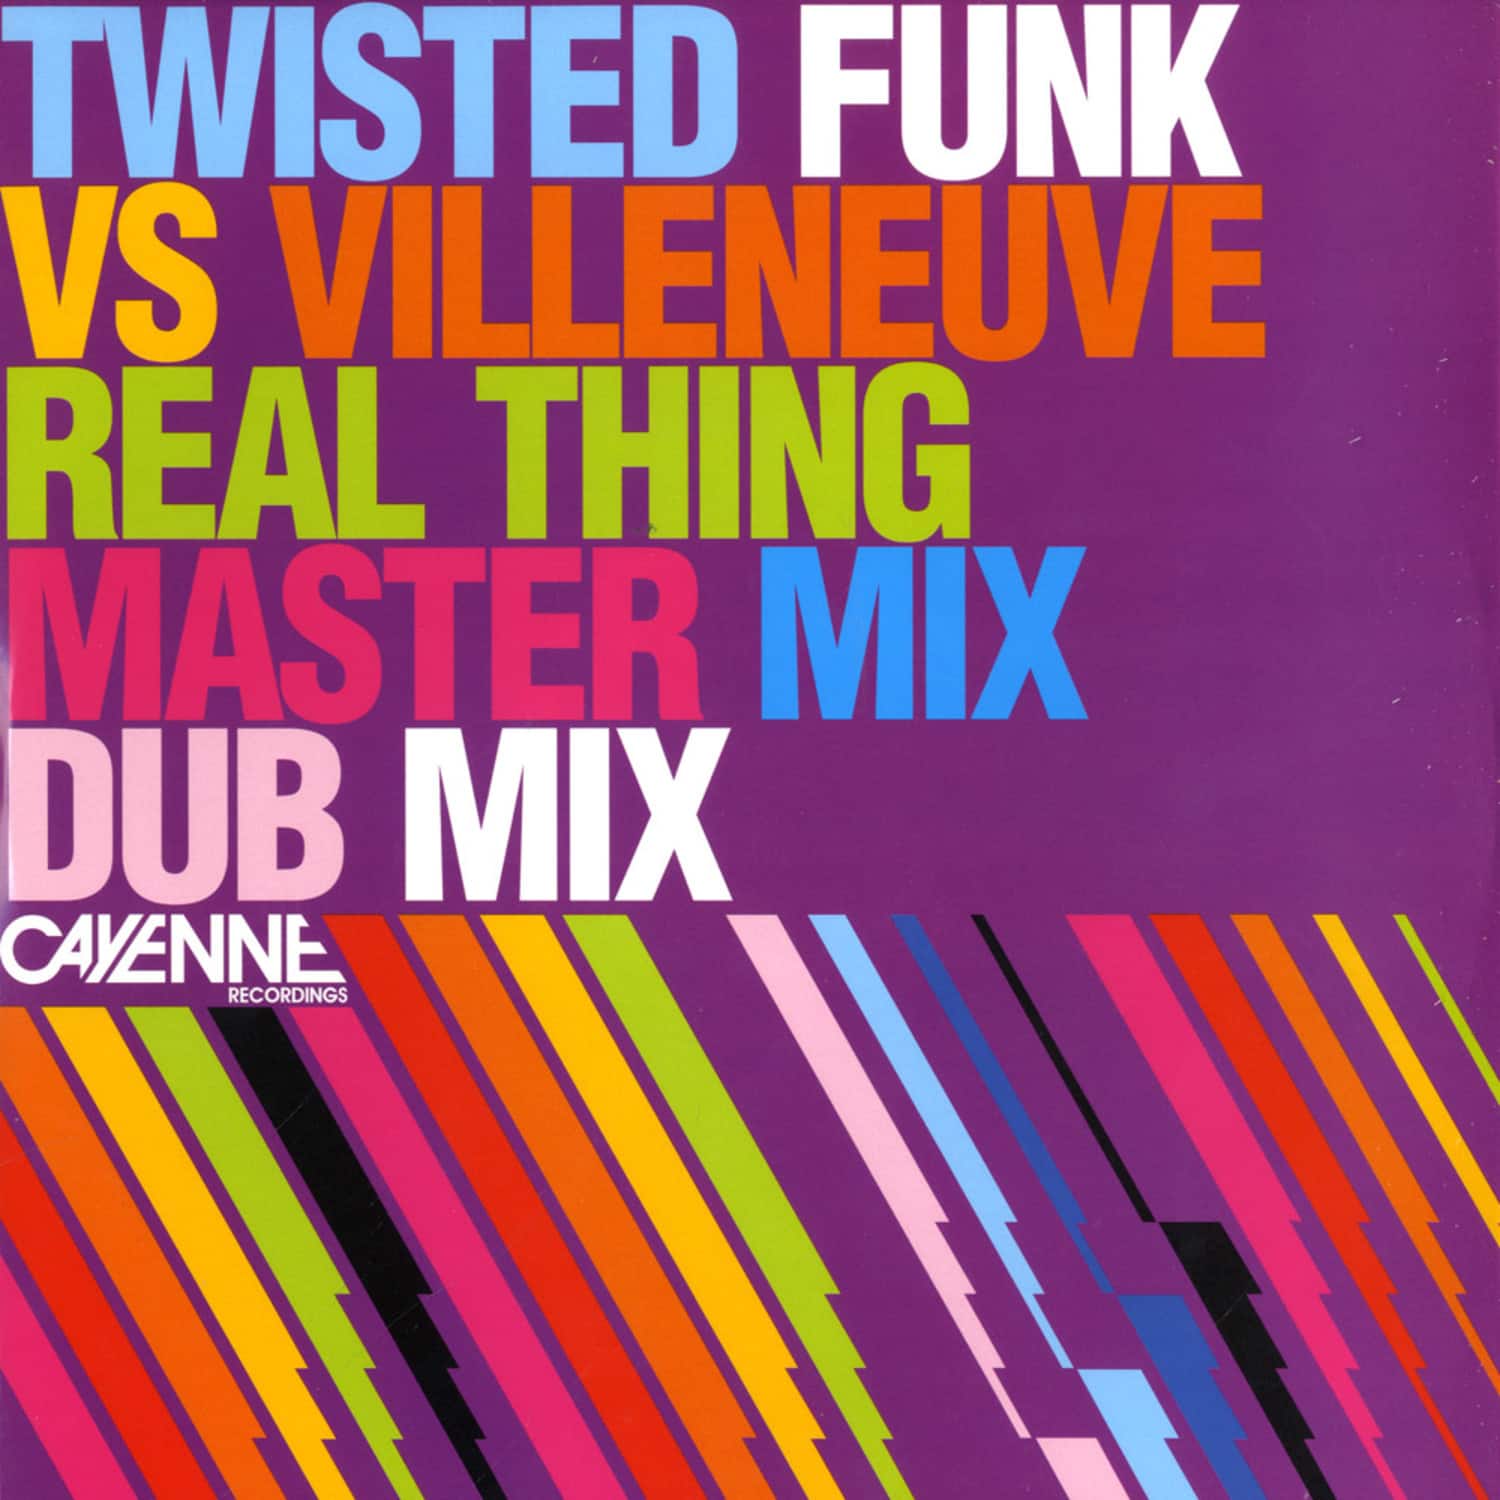 Twisted Funk vs Villeneuve - REAL THING